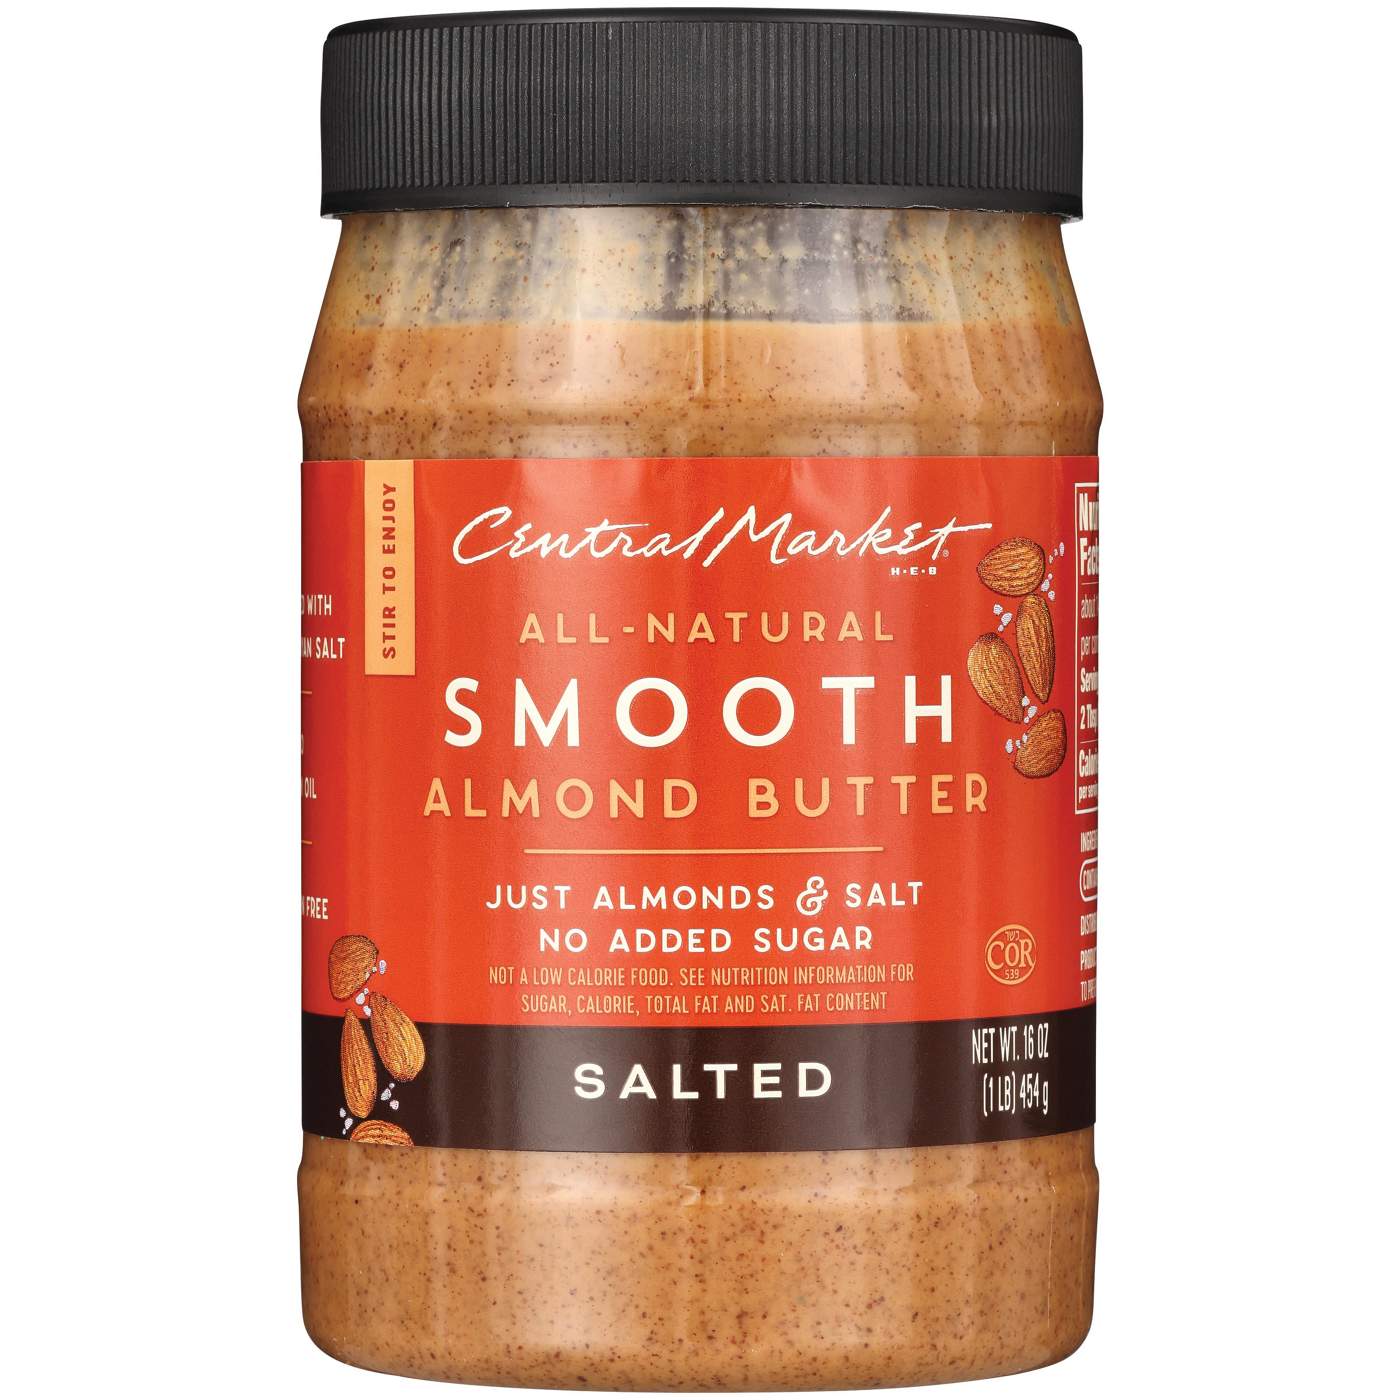 Central Market All-Natural Smooth Almond Butter – Salted; image 1 of 2